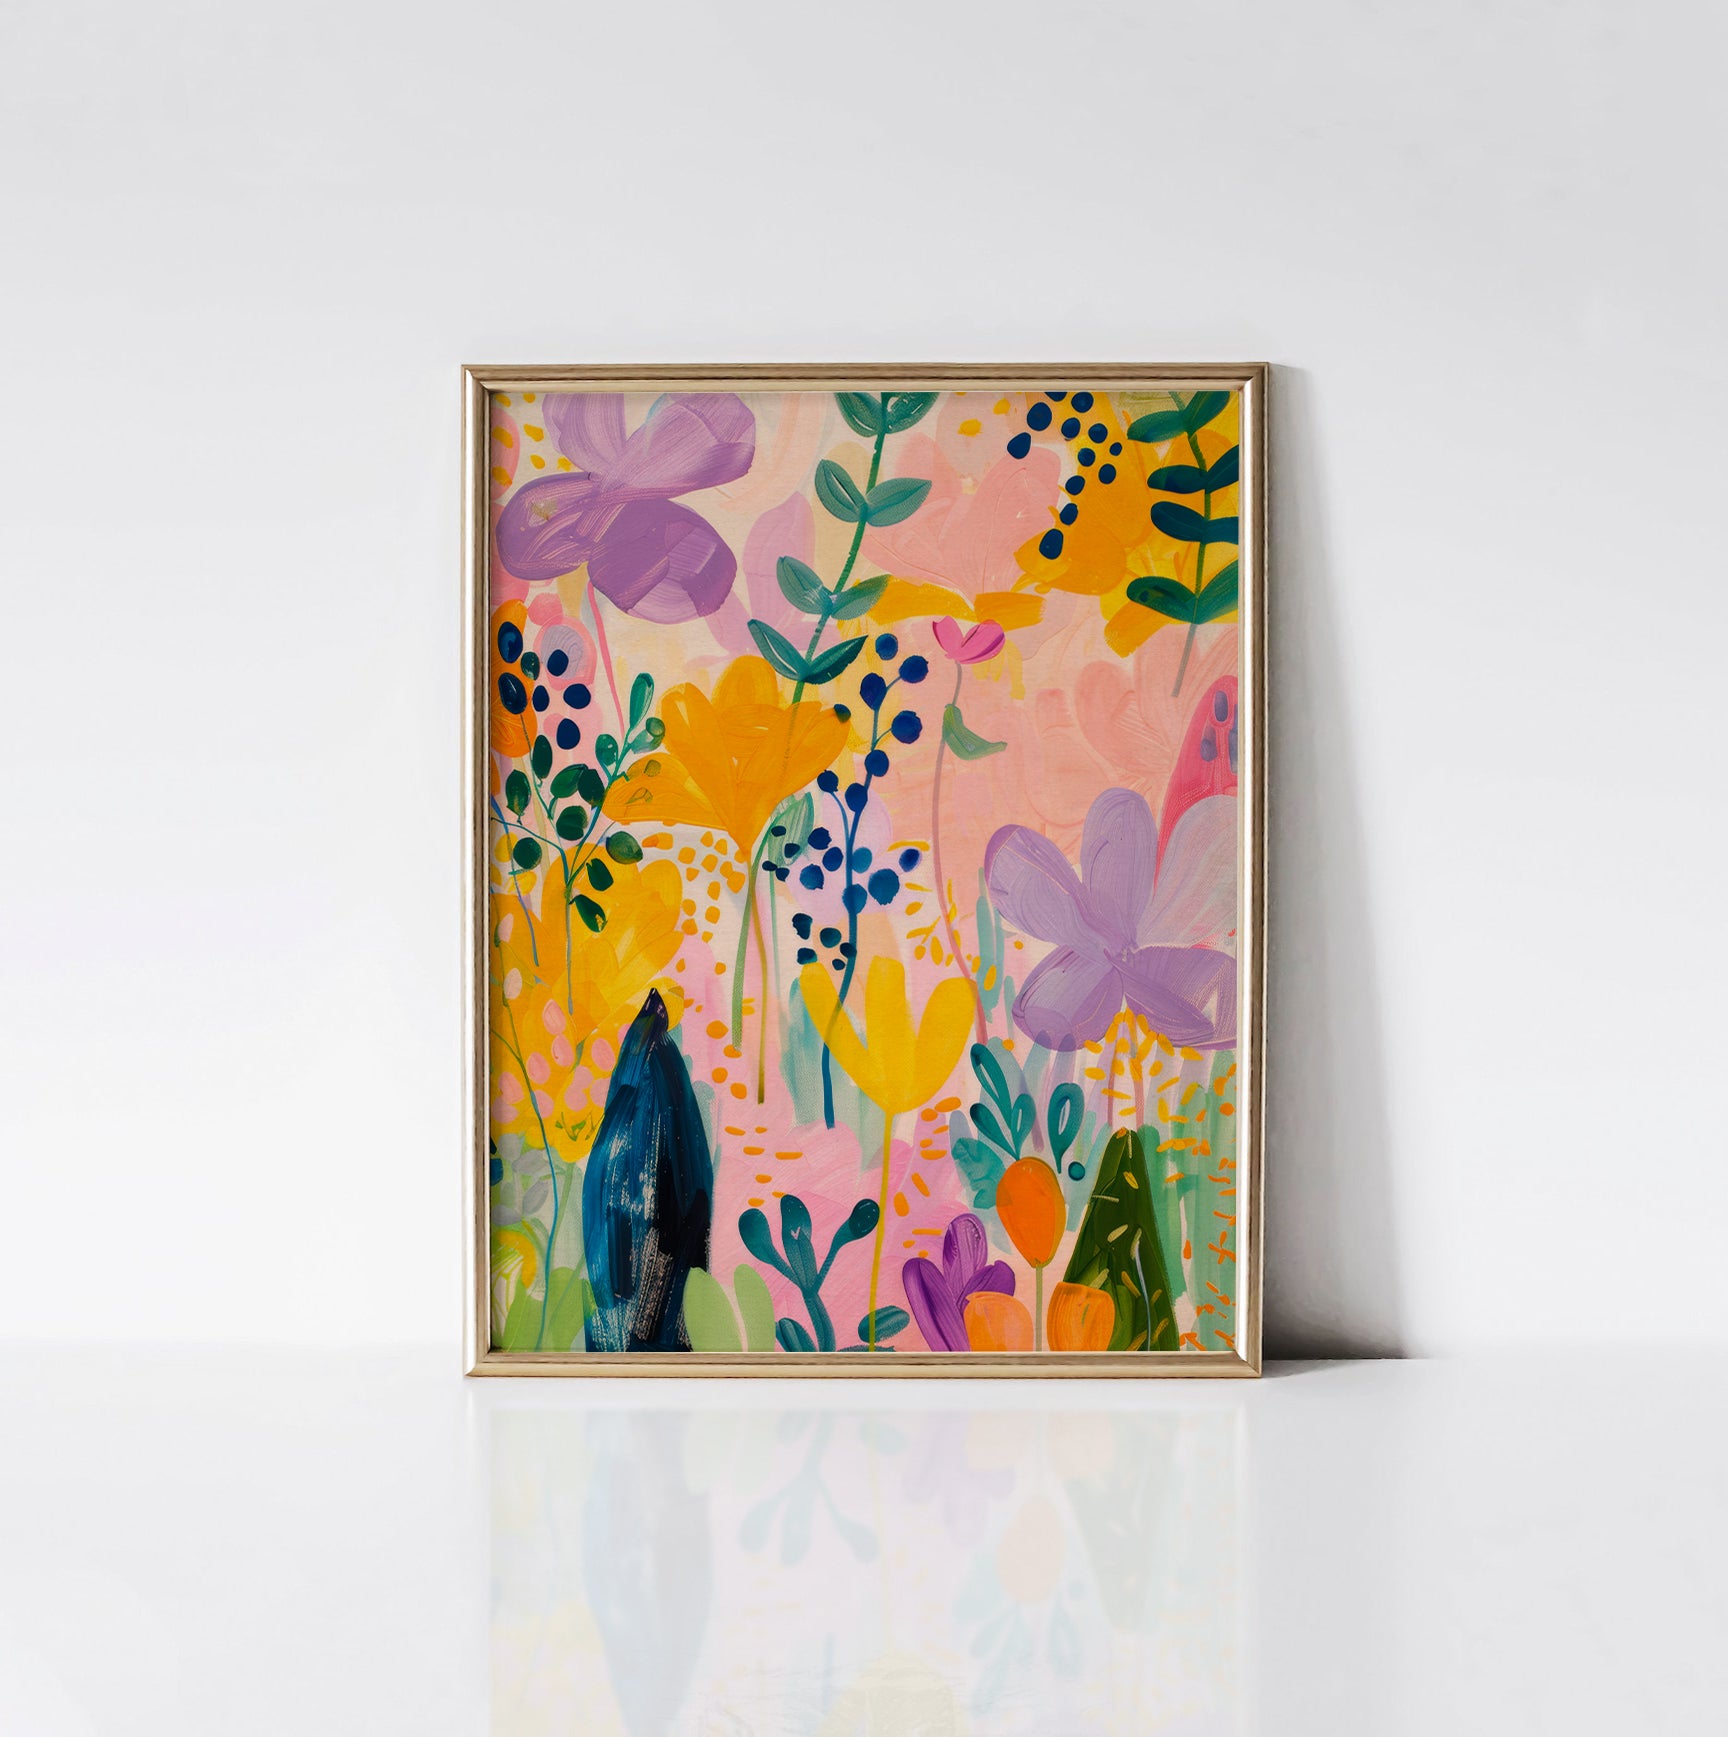 Floral Fantasy Art Print framed in an elegant gold frame, featuring a lively mix of colorful flowers in yellow, purple, and green on a soft pink background.